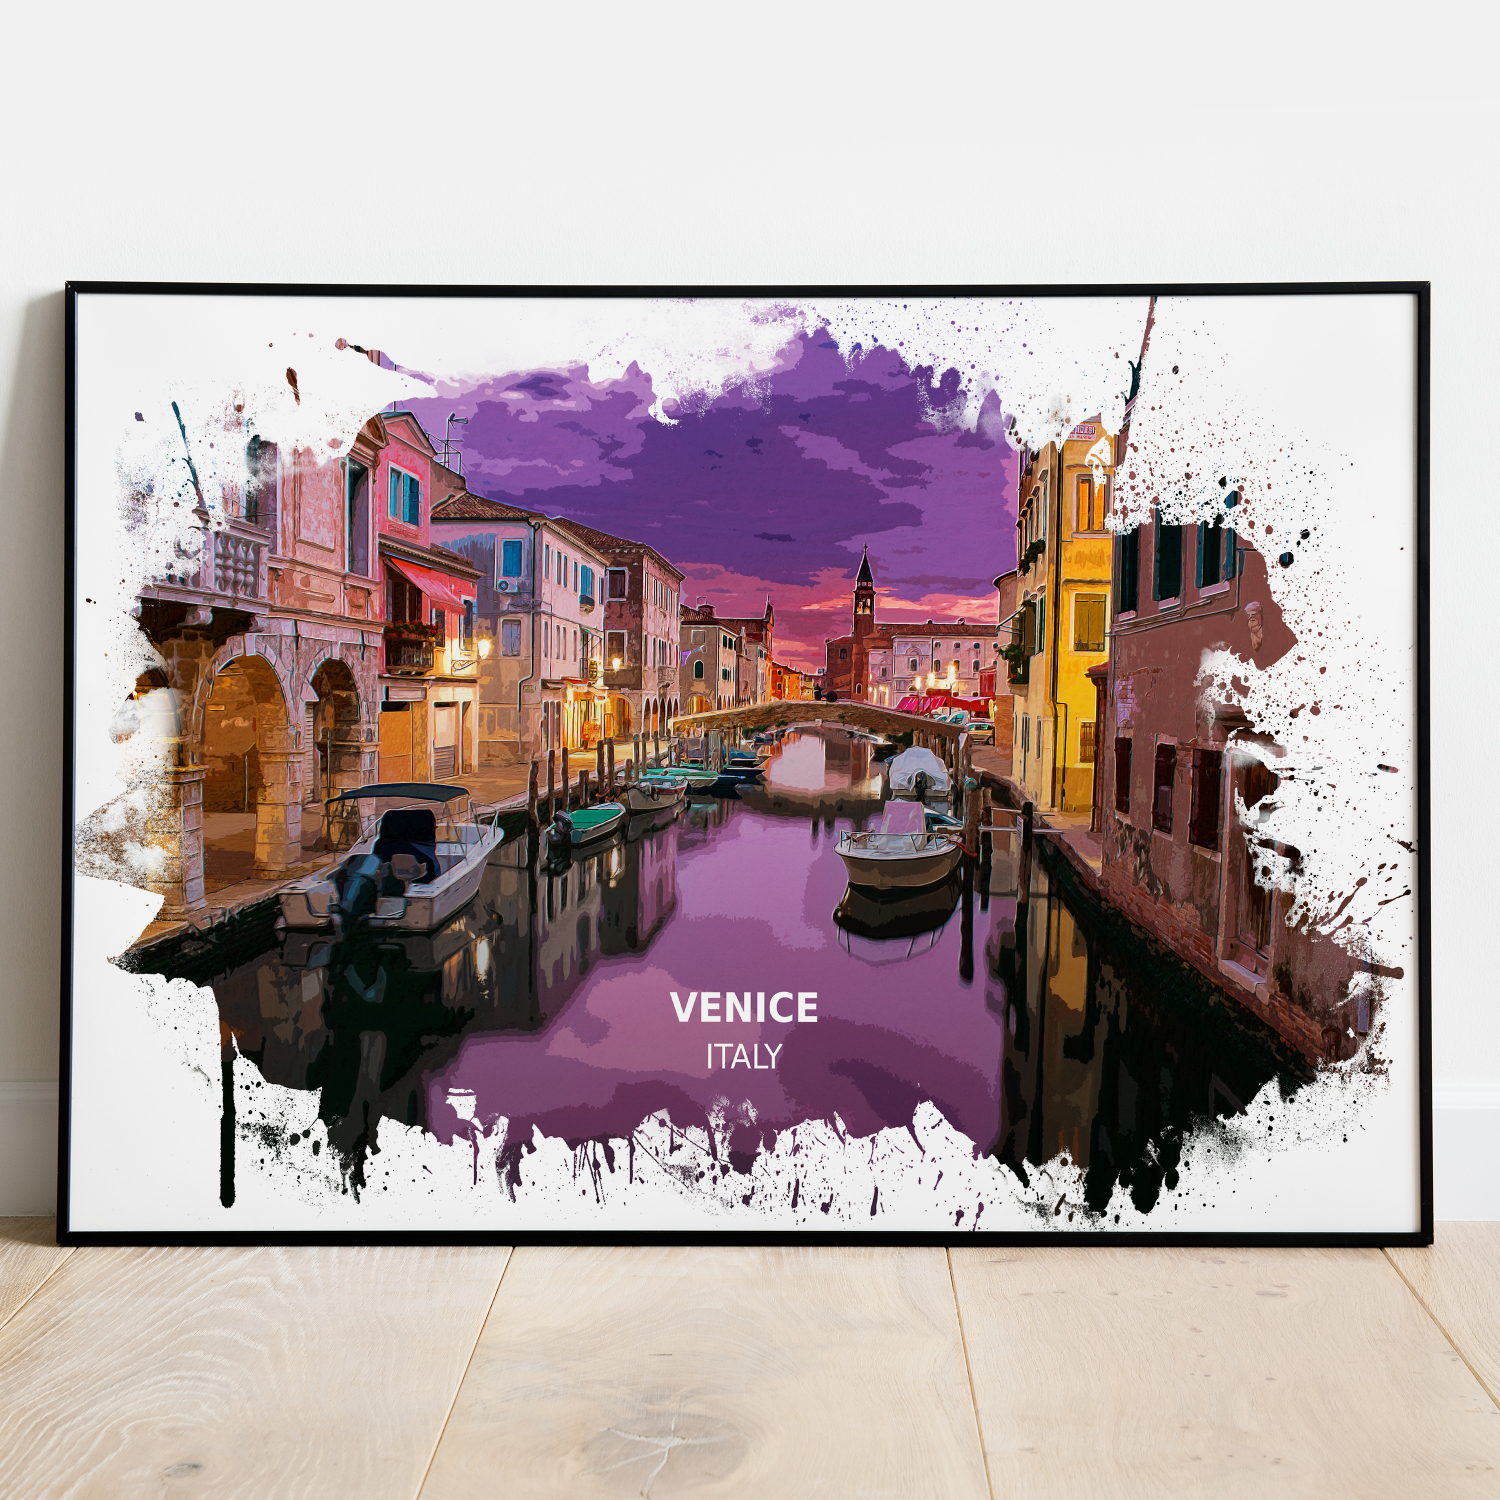 Venice - Italy - Print - A4 - Standard - Print Only